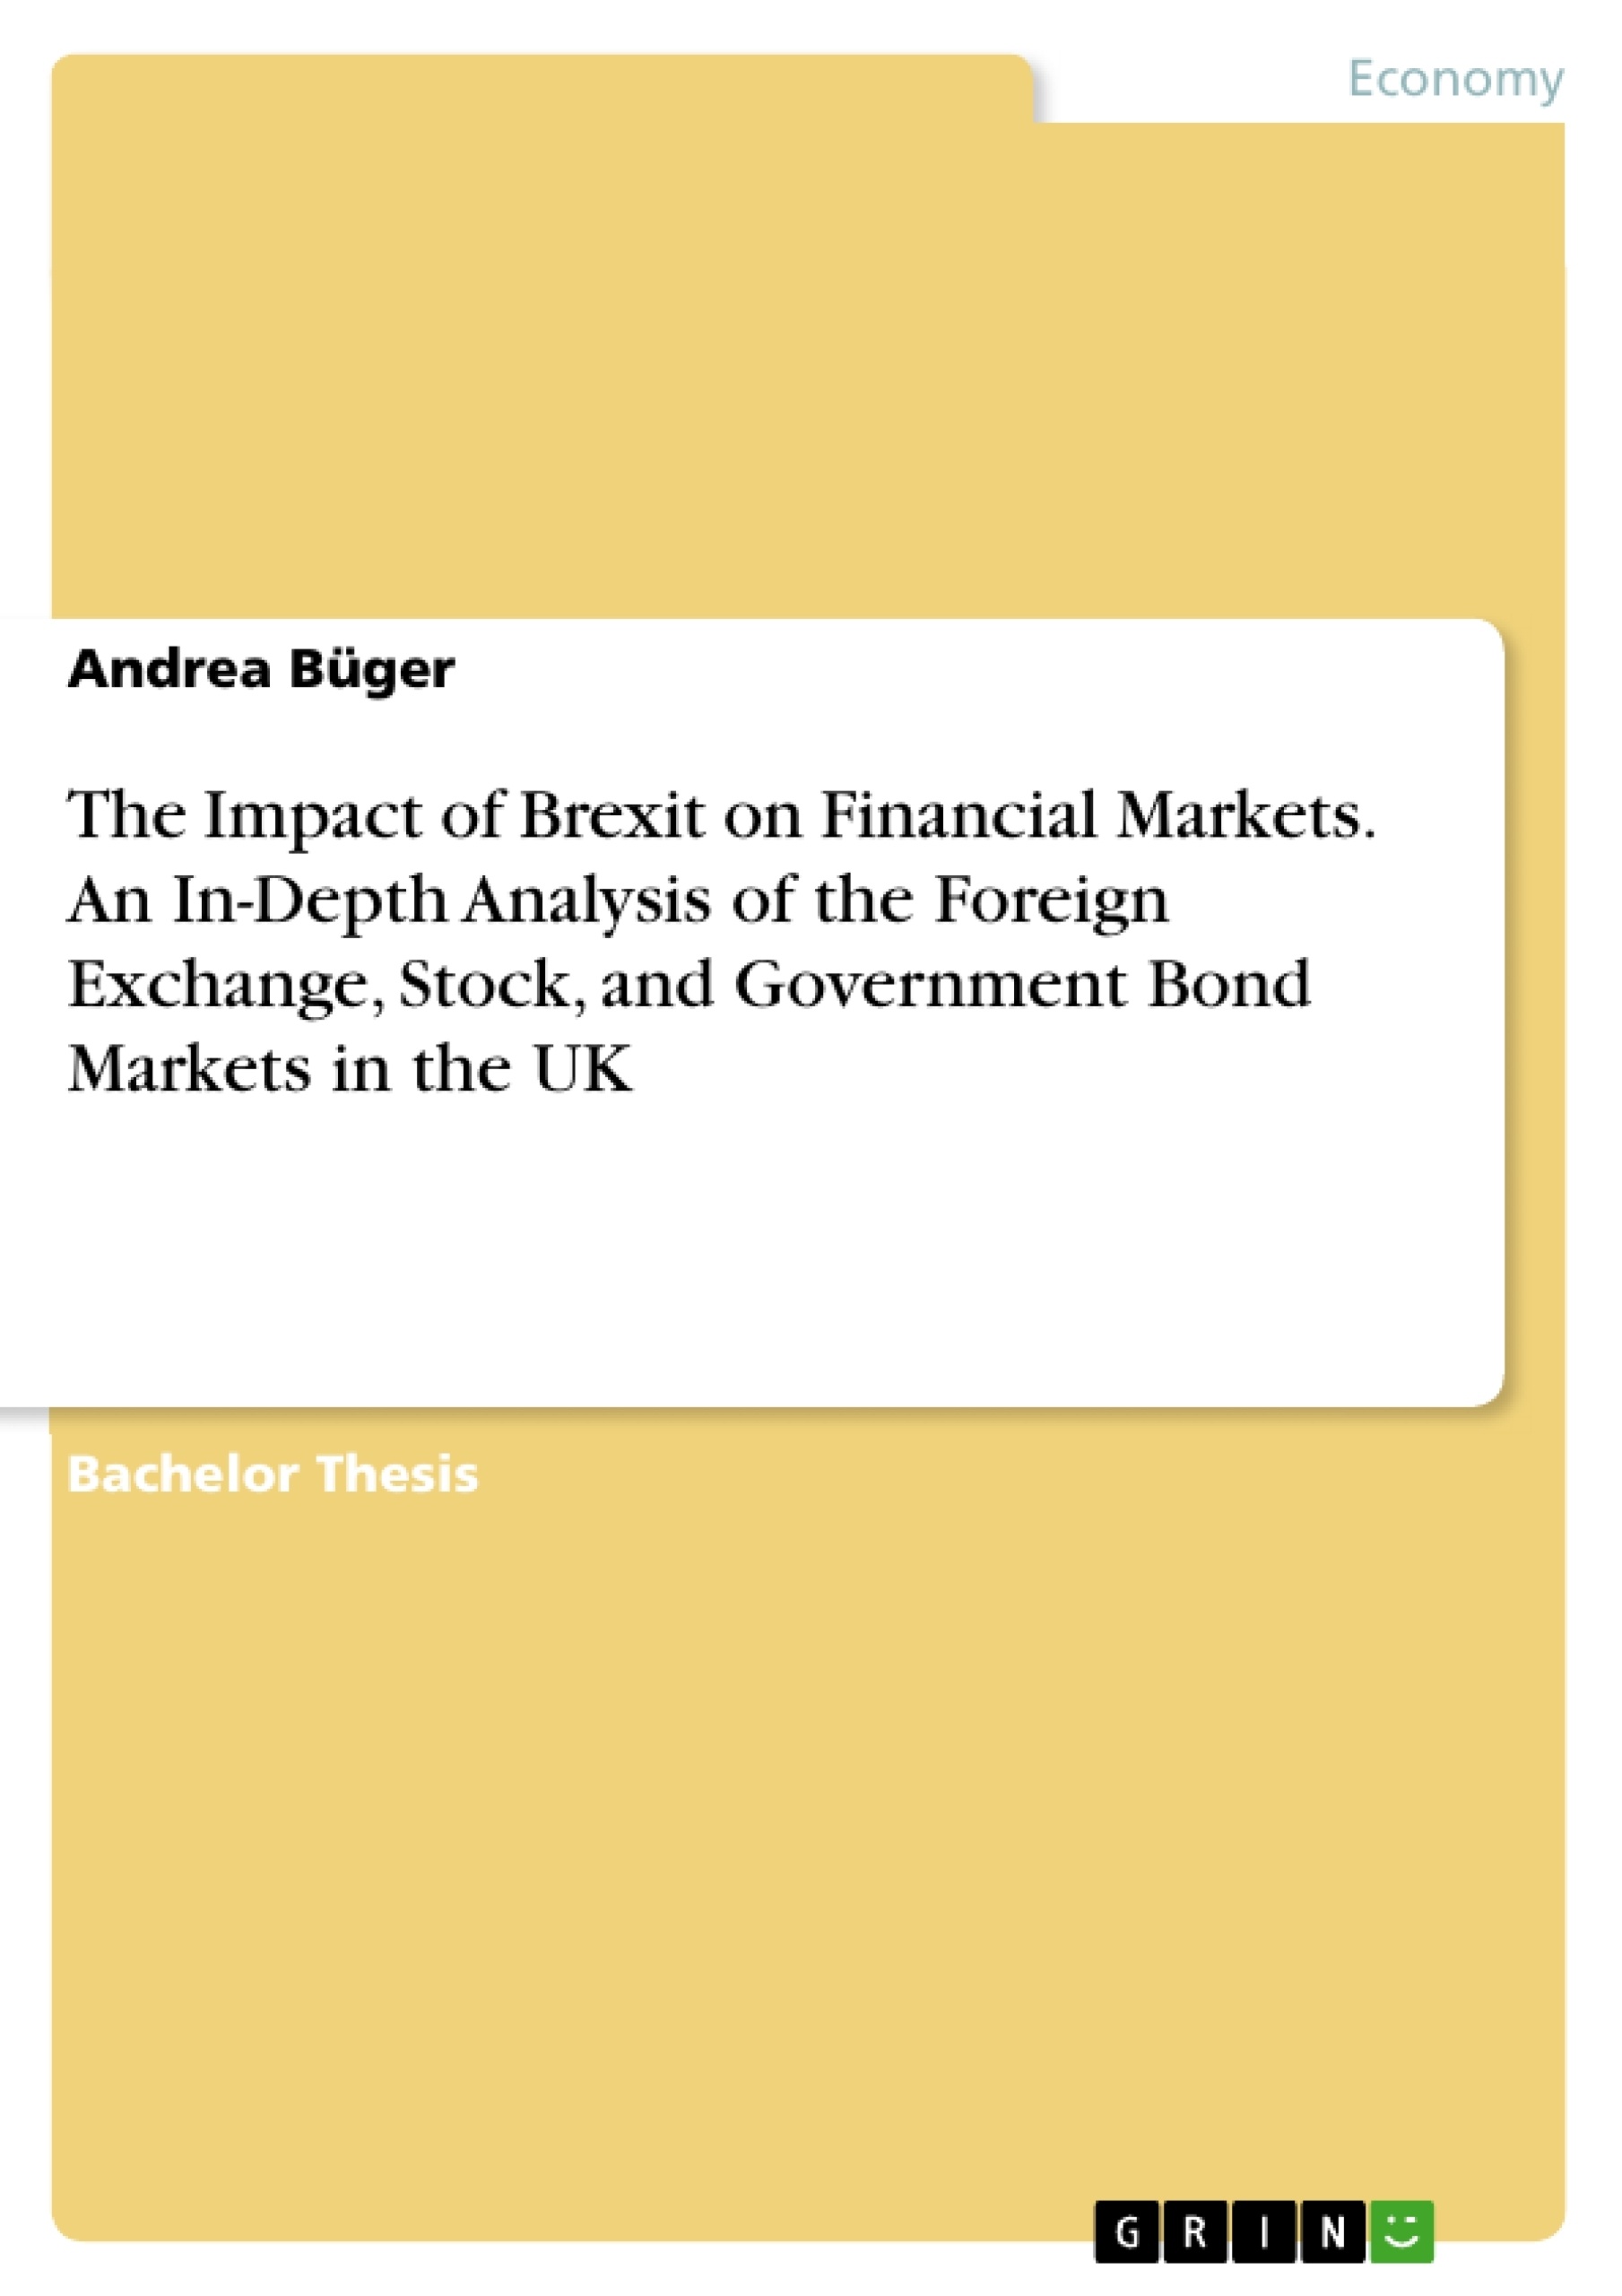 Title: The Impact of Brexit on Financial Markets. An In-Depth Analysis of the Foreign Exchange, Stock, and Government Bond Markets in the UK